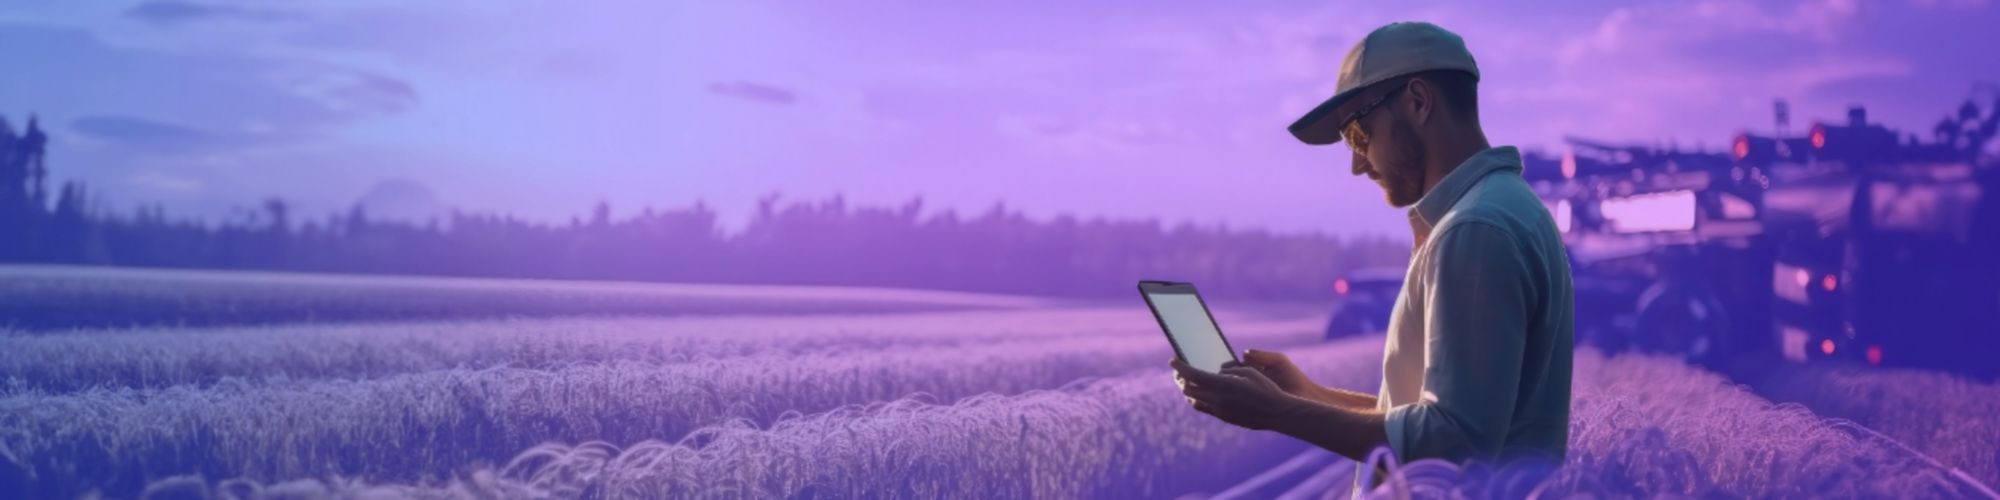 man using a tablet in a field